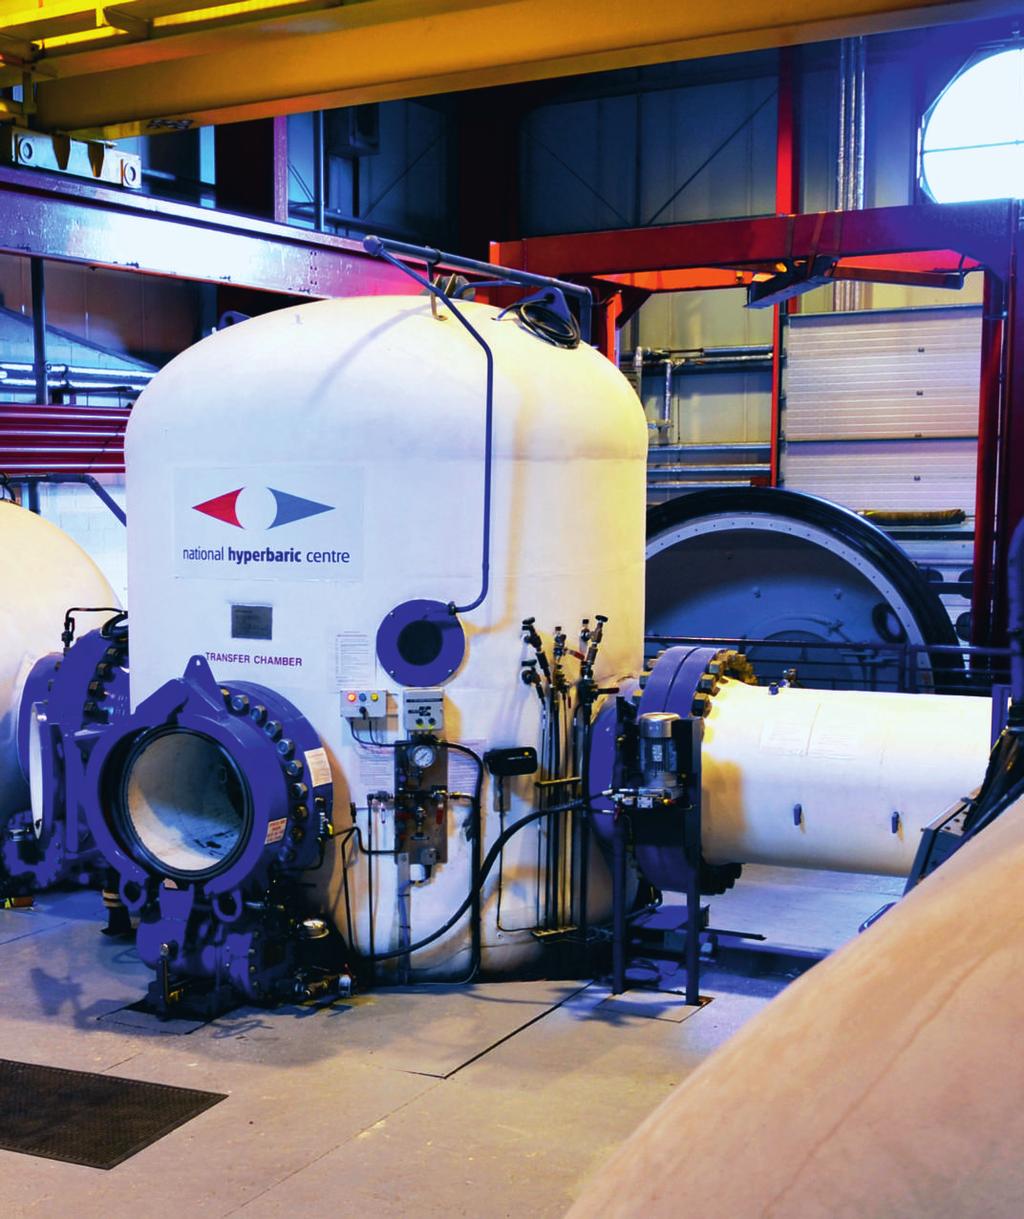 We offer a wide range of services from diving-related training, hyperbaric welding, pressure testing, consulting and emergency services to customers worldwide.